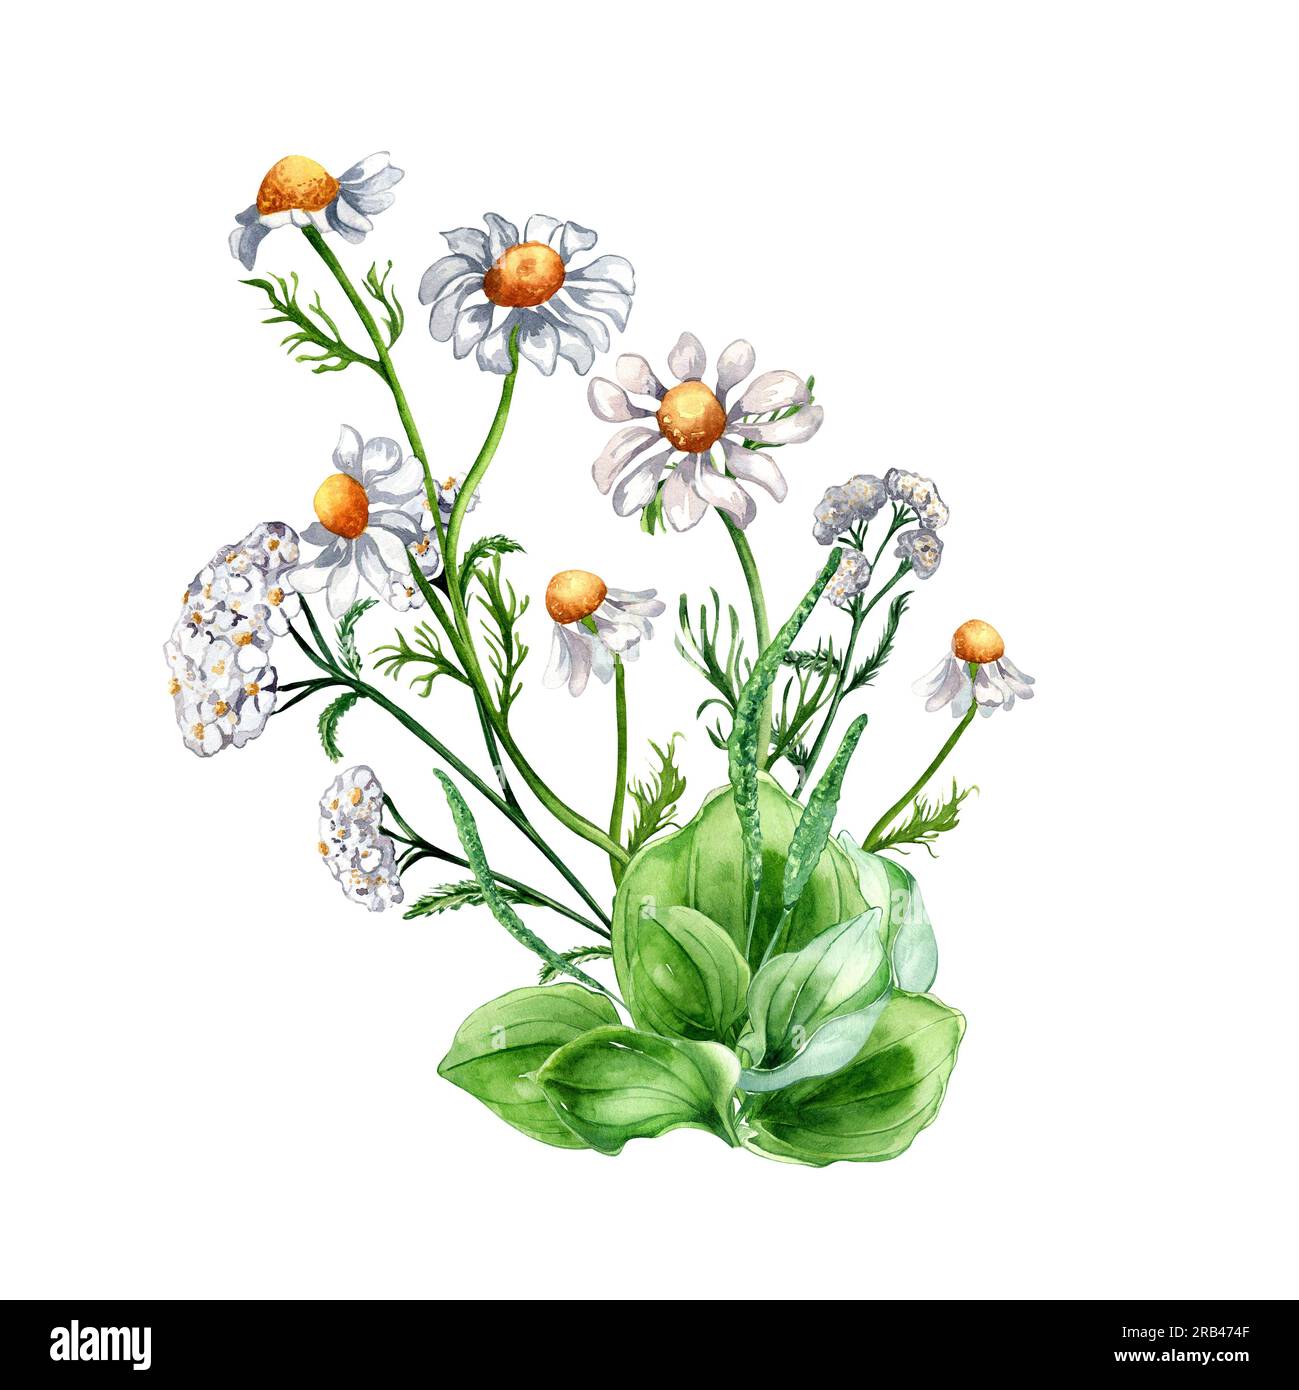 Bouquet of meadow medicinal flower, herb plants watercolor illustration isolated on white background. Daisy, camomile, plantain, achillea millefolium Stock Photo